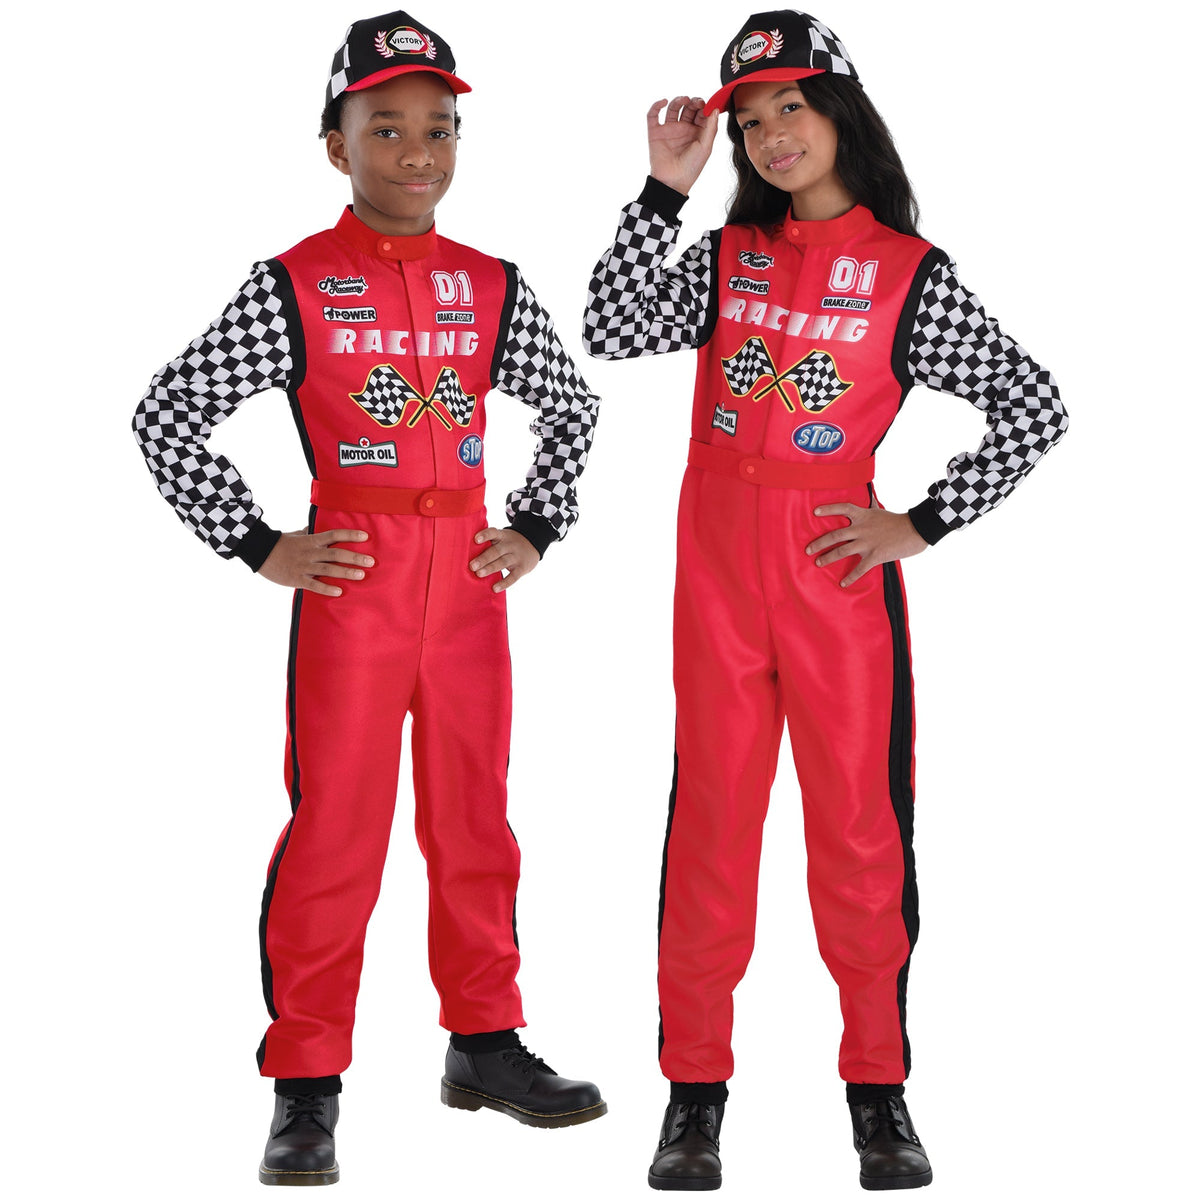 HALLOWEEN COSTUME CO. Costumes Racecar Driver Costume for Kids, Red Jumpsuit and Hat